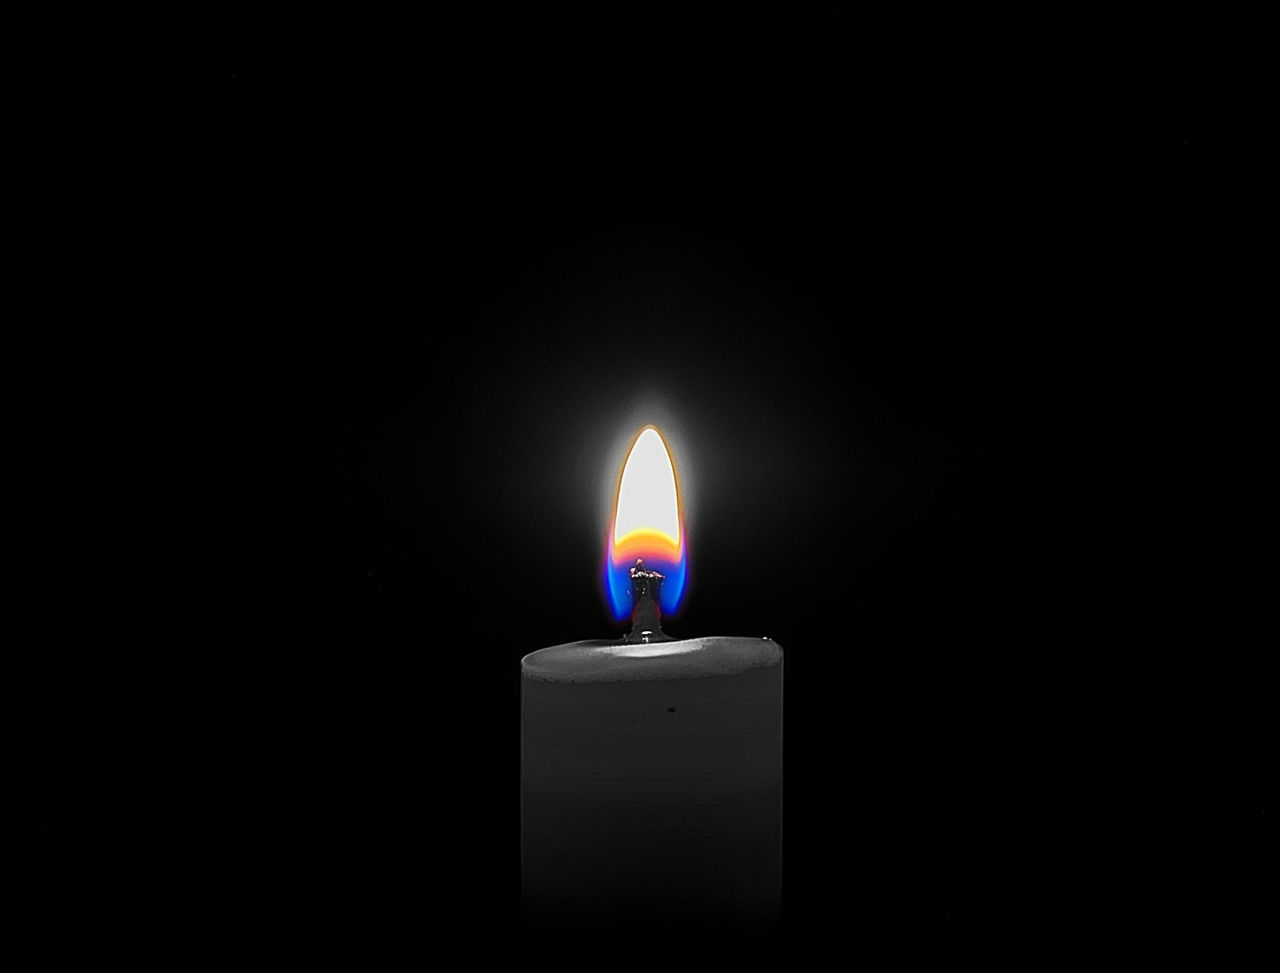 flame, fire, burning, fire - natural phenomenon, heat - temperature, illuminated, candle, copy space, studio shot, glowing, indoors, black background, dark, darkroom, close-up, domestic room, no people, nature, cut out, lighting equipment, melting, luminosity